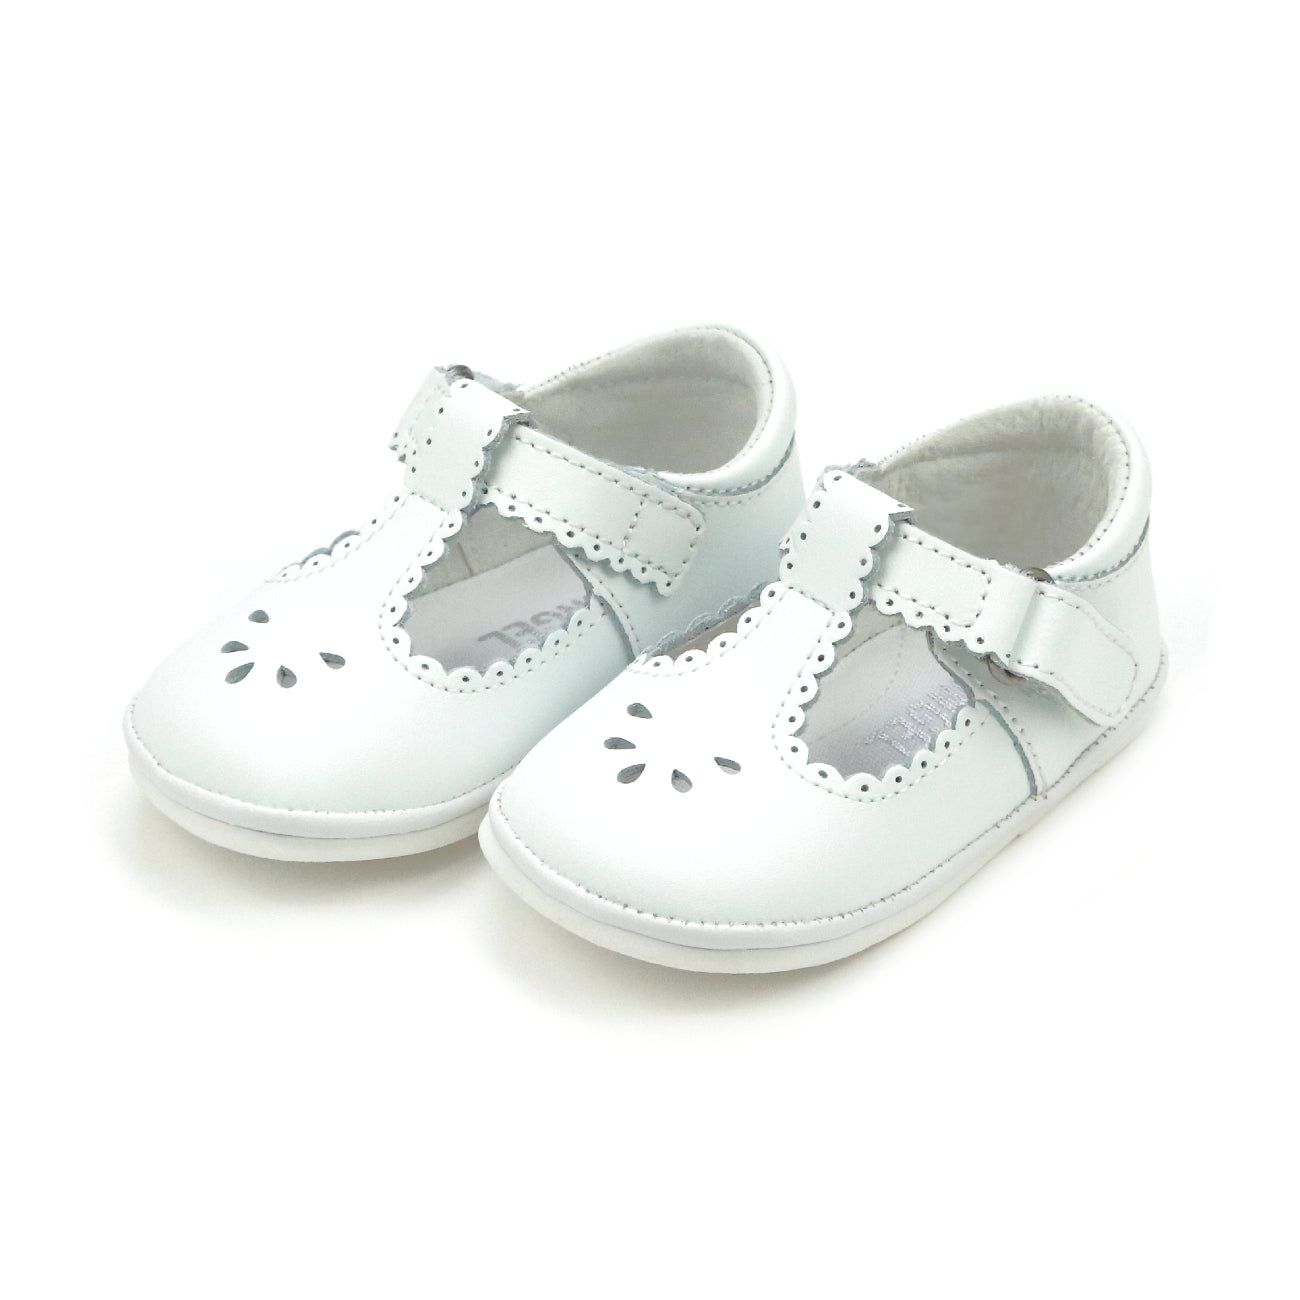 Dottie Scalloped T-Strap Mary Jane - Babies & Toddlers